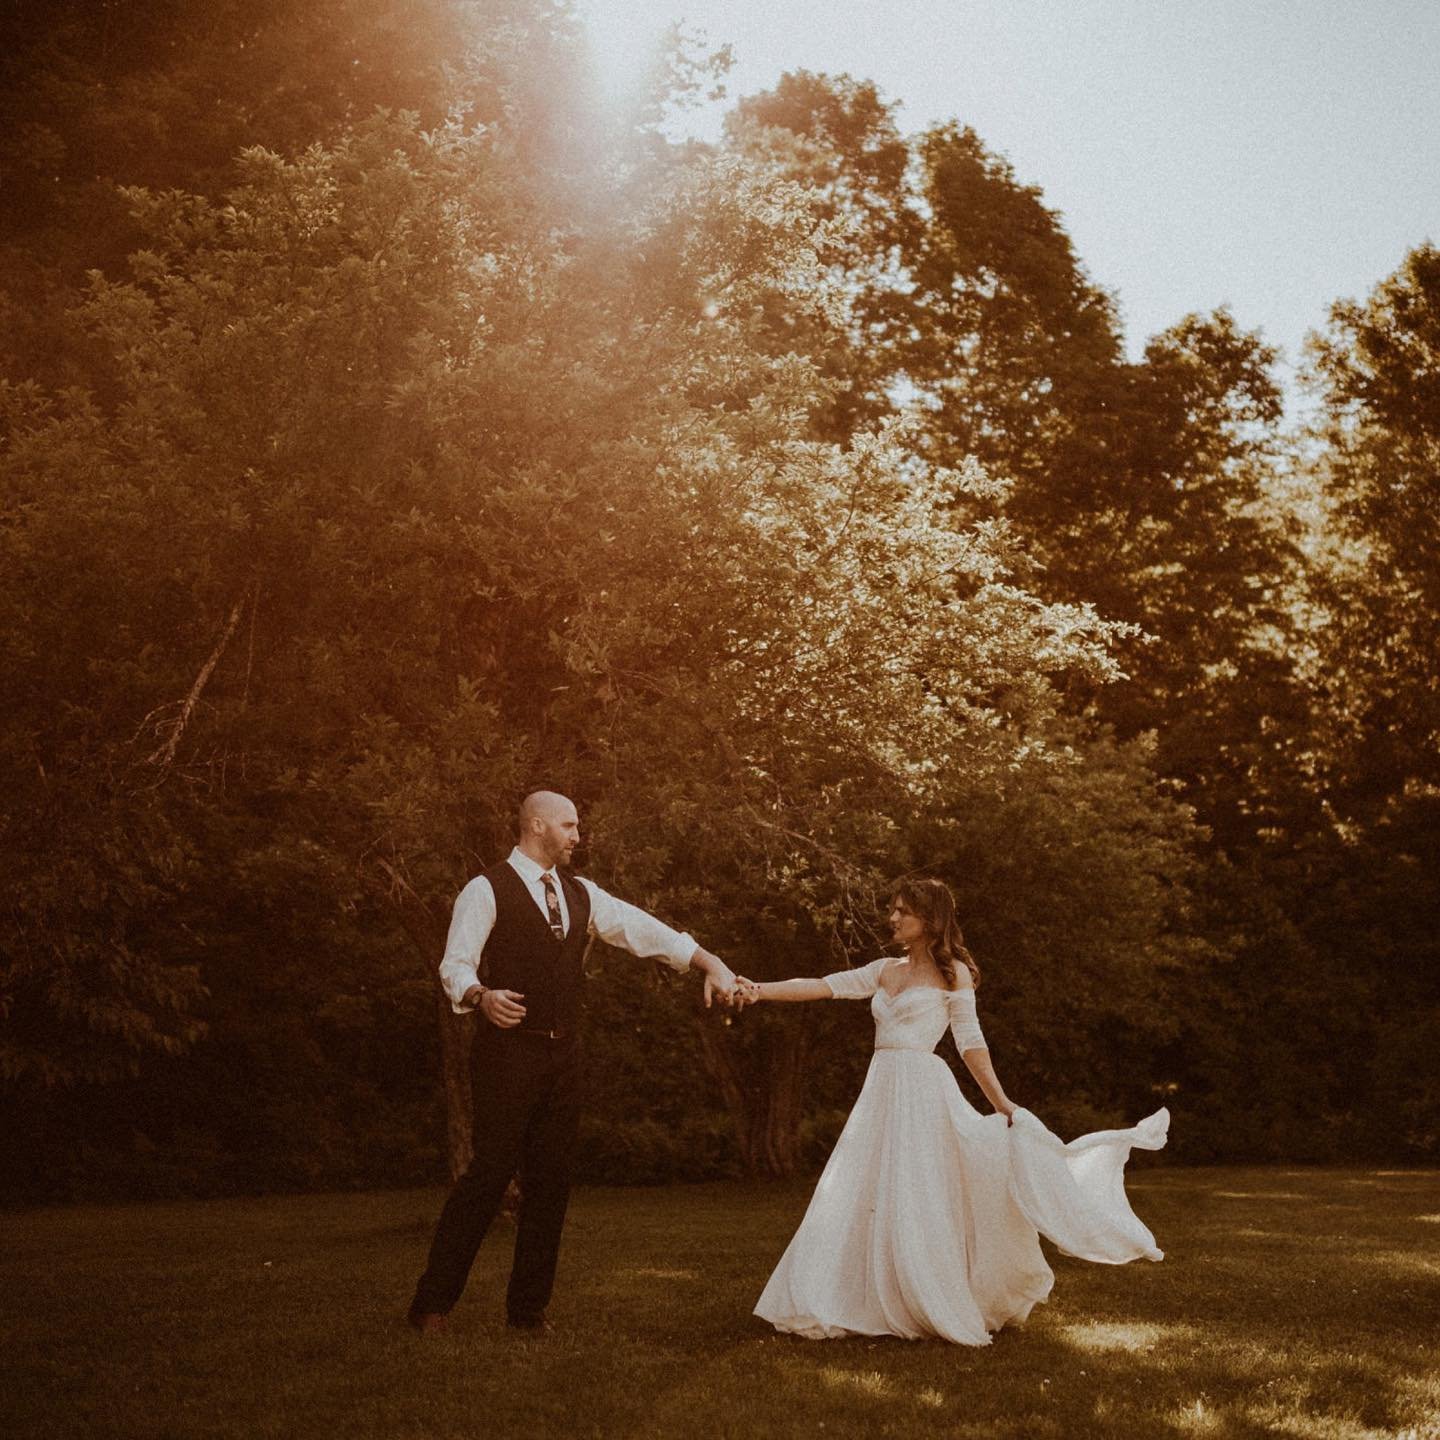 glimpses of victoria &amp; robert&rsquo;s wedding day last summer 🌞

i don&rsquo;t even know where to start about this day?!?! it was sooo hard picking photos to share&hellip; but seriously, these two are absolutely lovely and they&rsquo;re just the